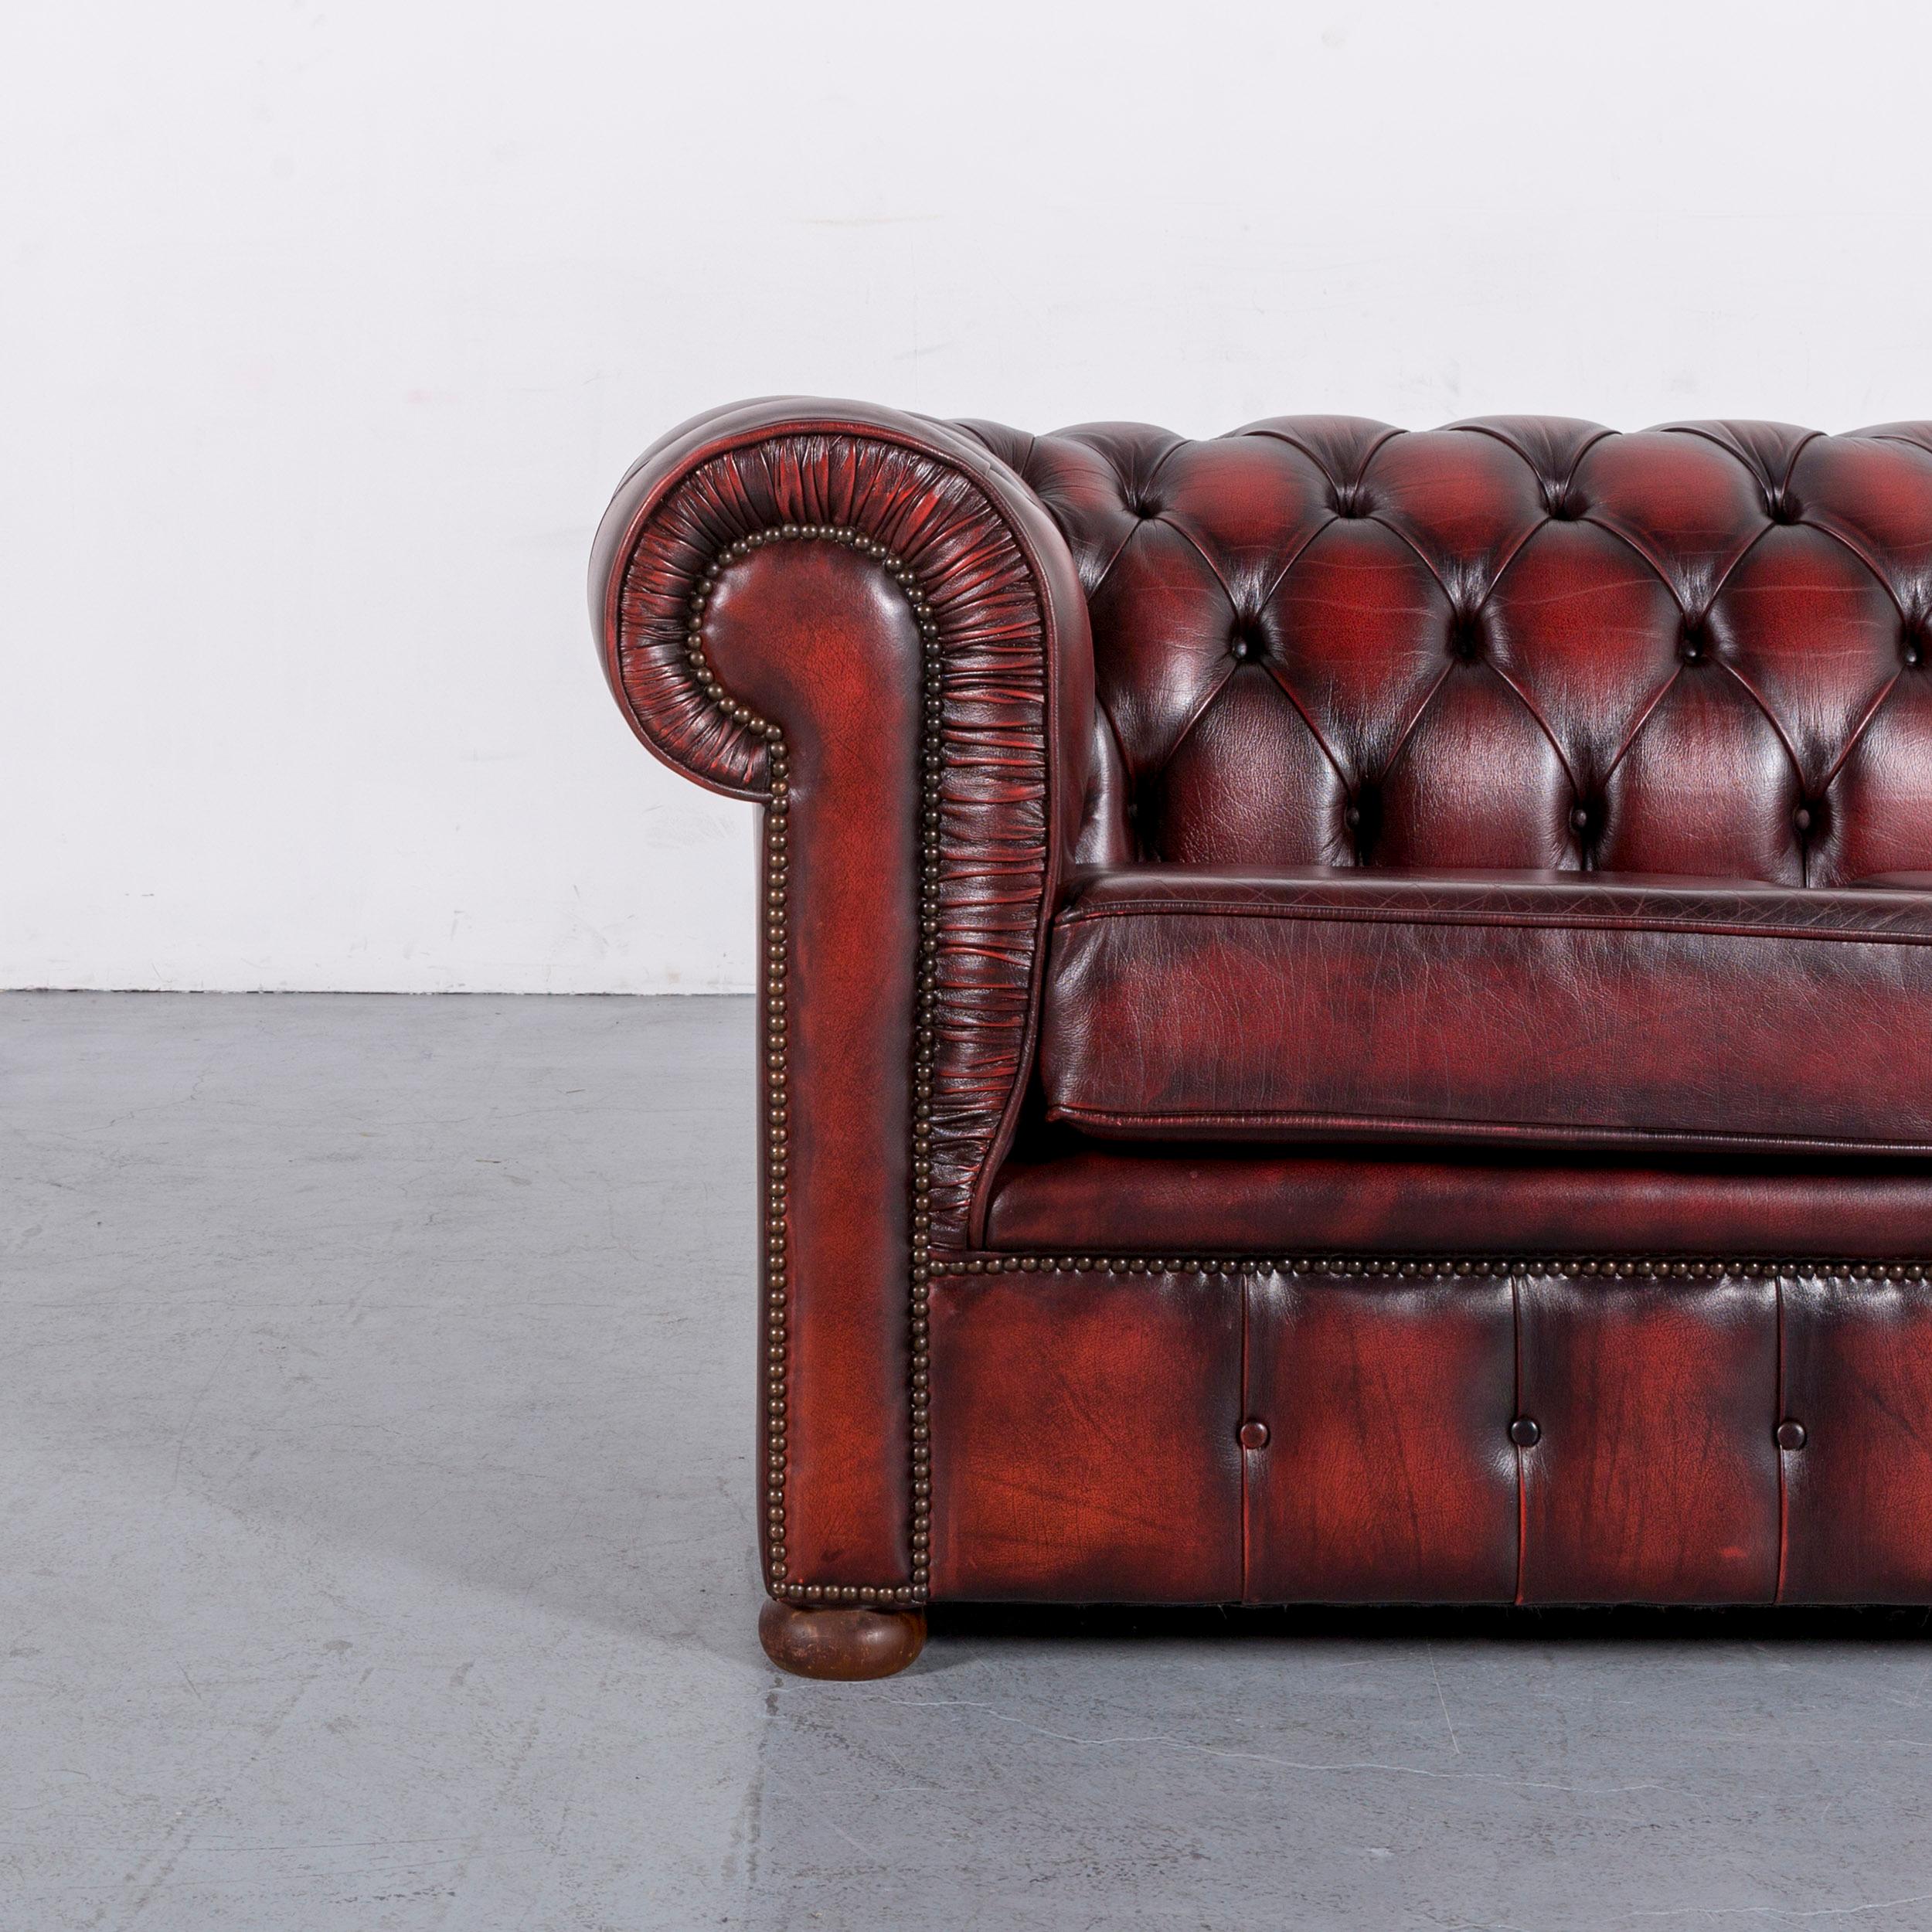 We bring to you an Chesterfield leather sofa red two-seat vintage retro.
























